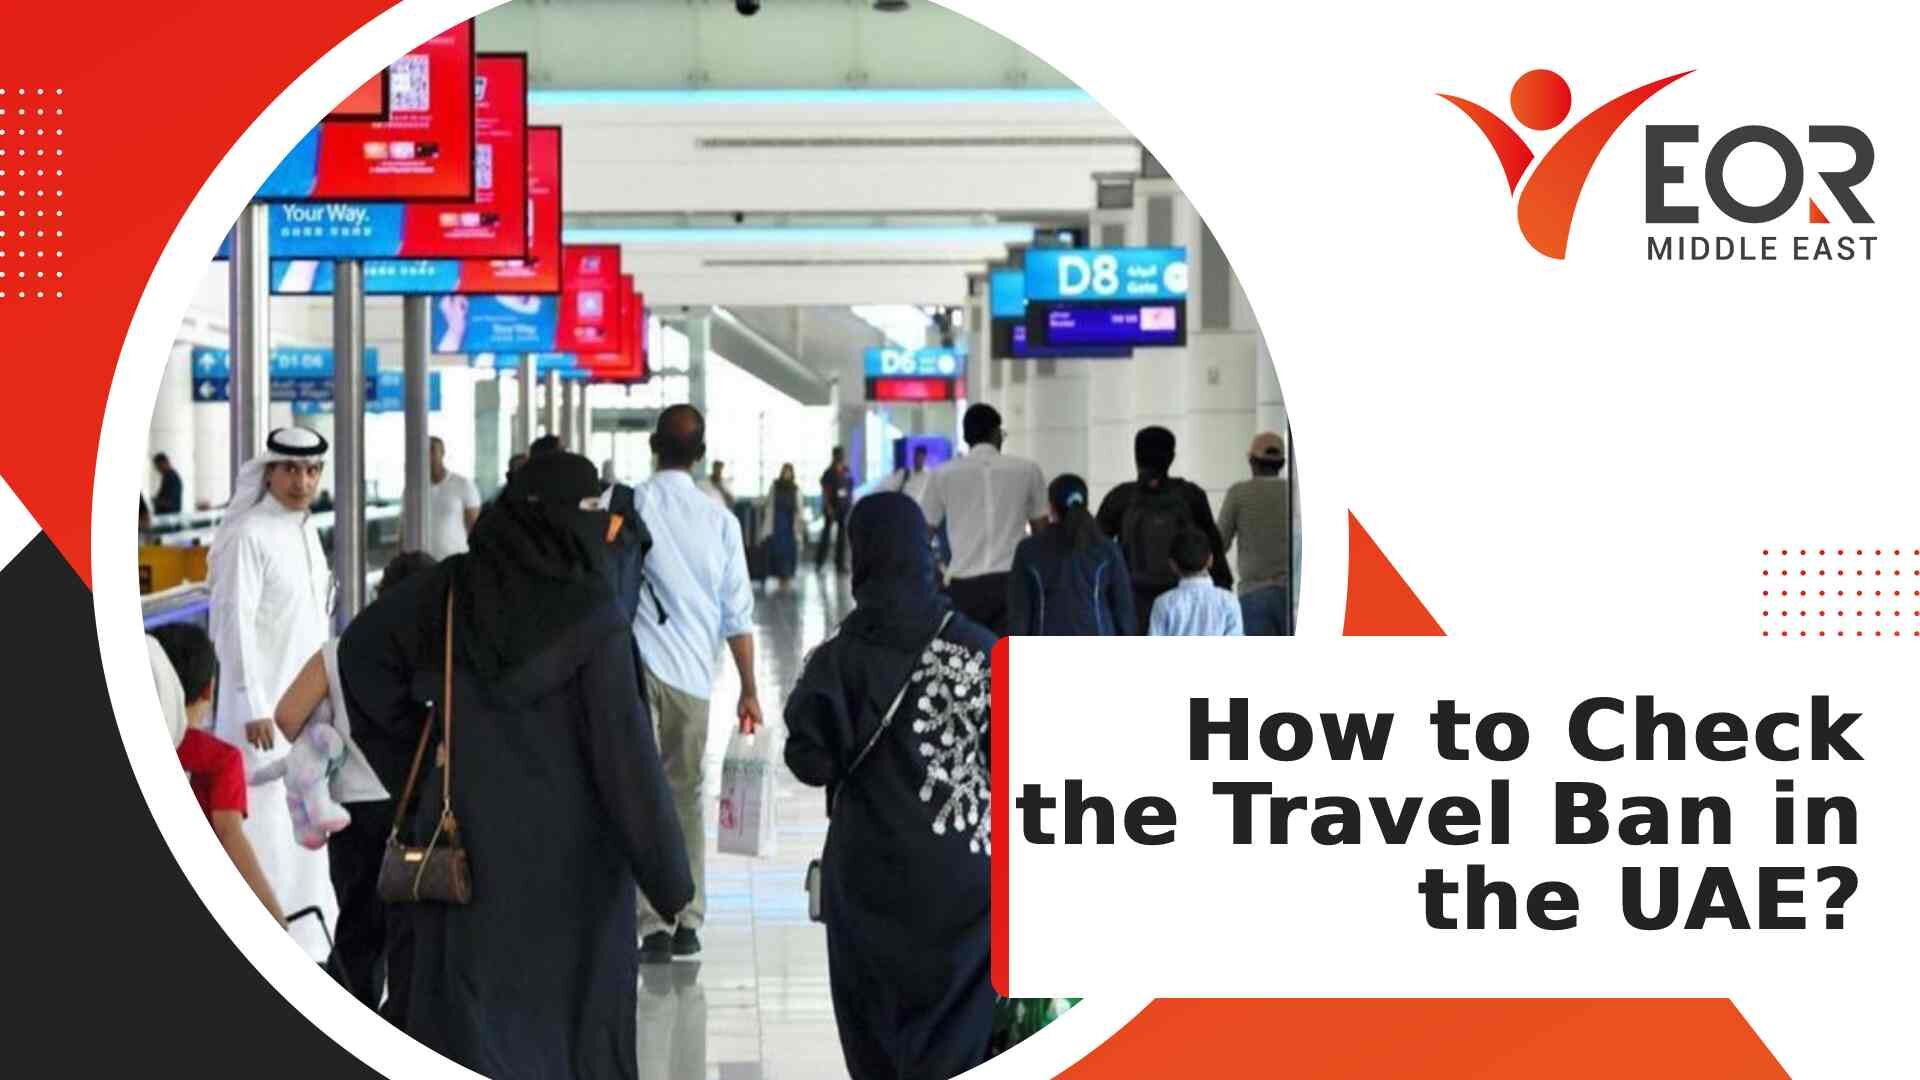 How to Check the Travel Ban in the UAE